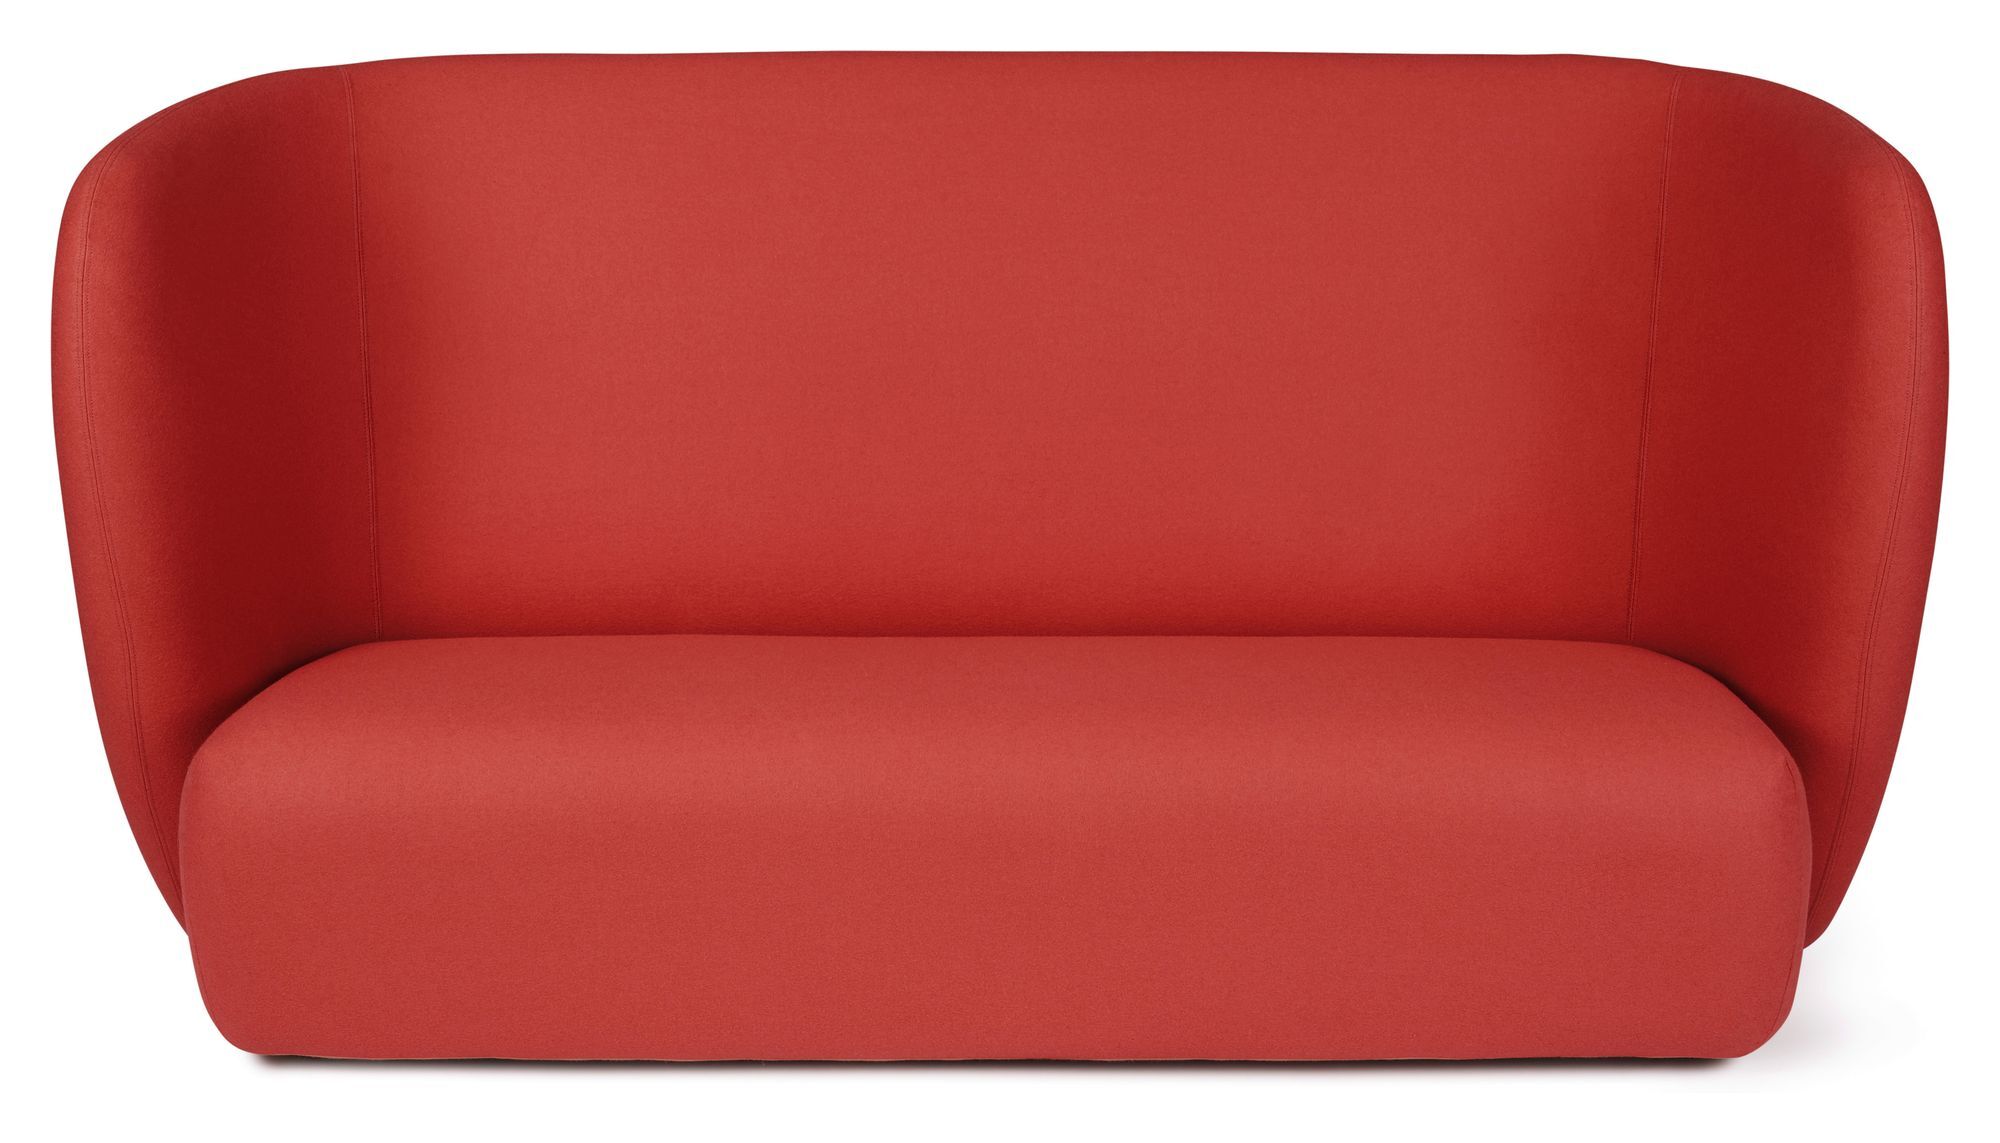 Warm Nordic HAVEN 3-pers. Sofa Red Apple   Unoliving